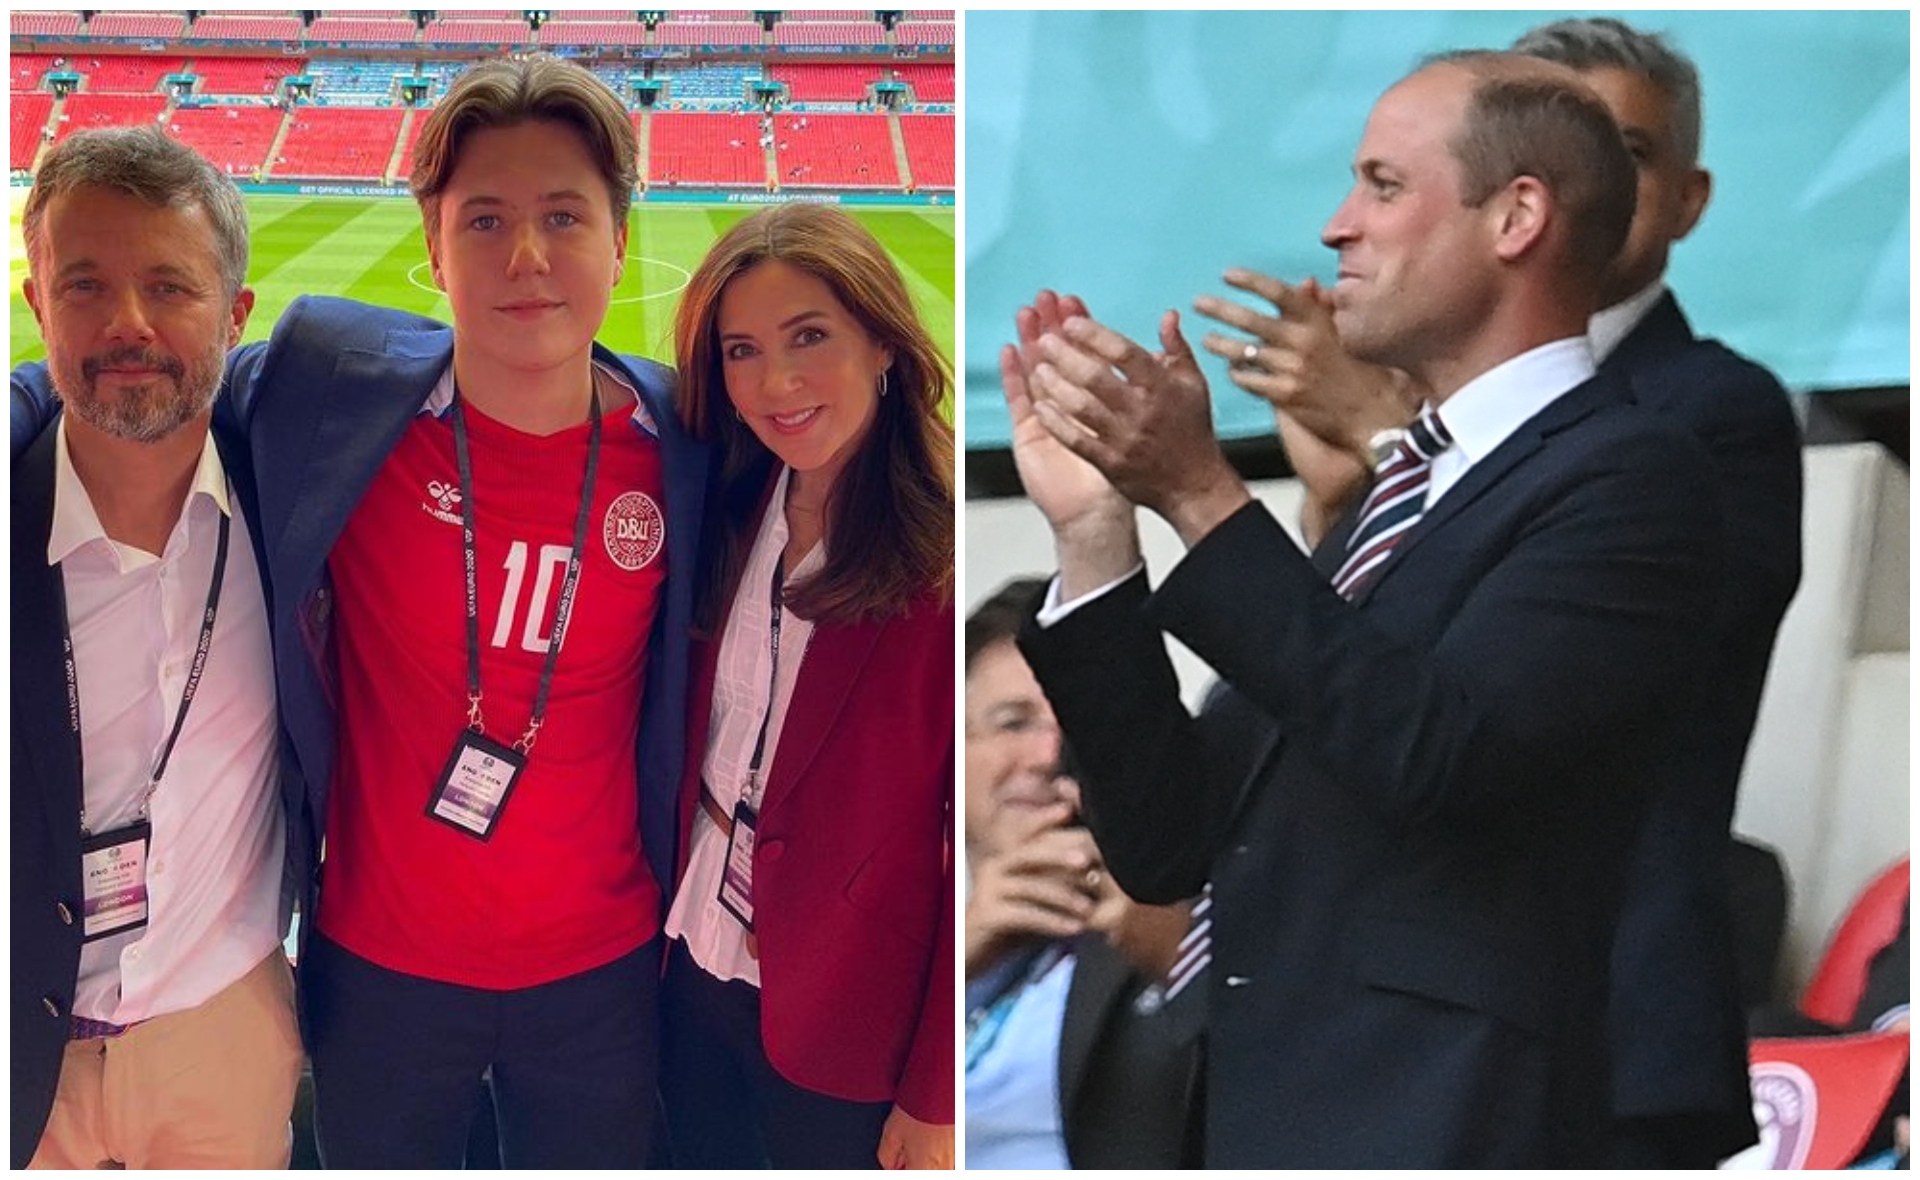 Crown Princess Mary, Prince William, Princess Eugenie and more get into the spirit of sport as their national soccer teams go head to head